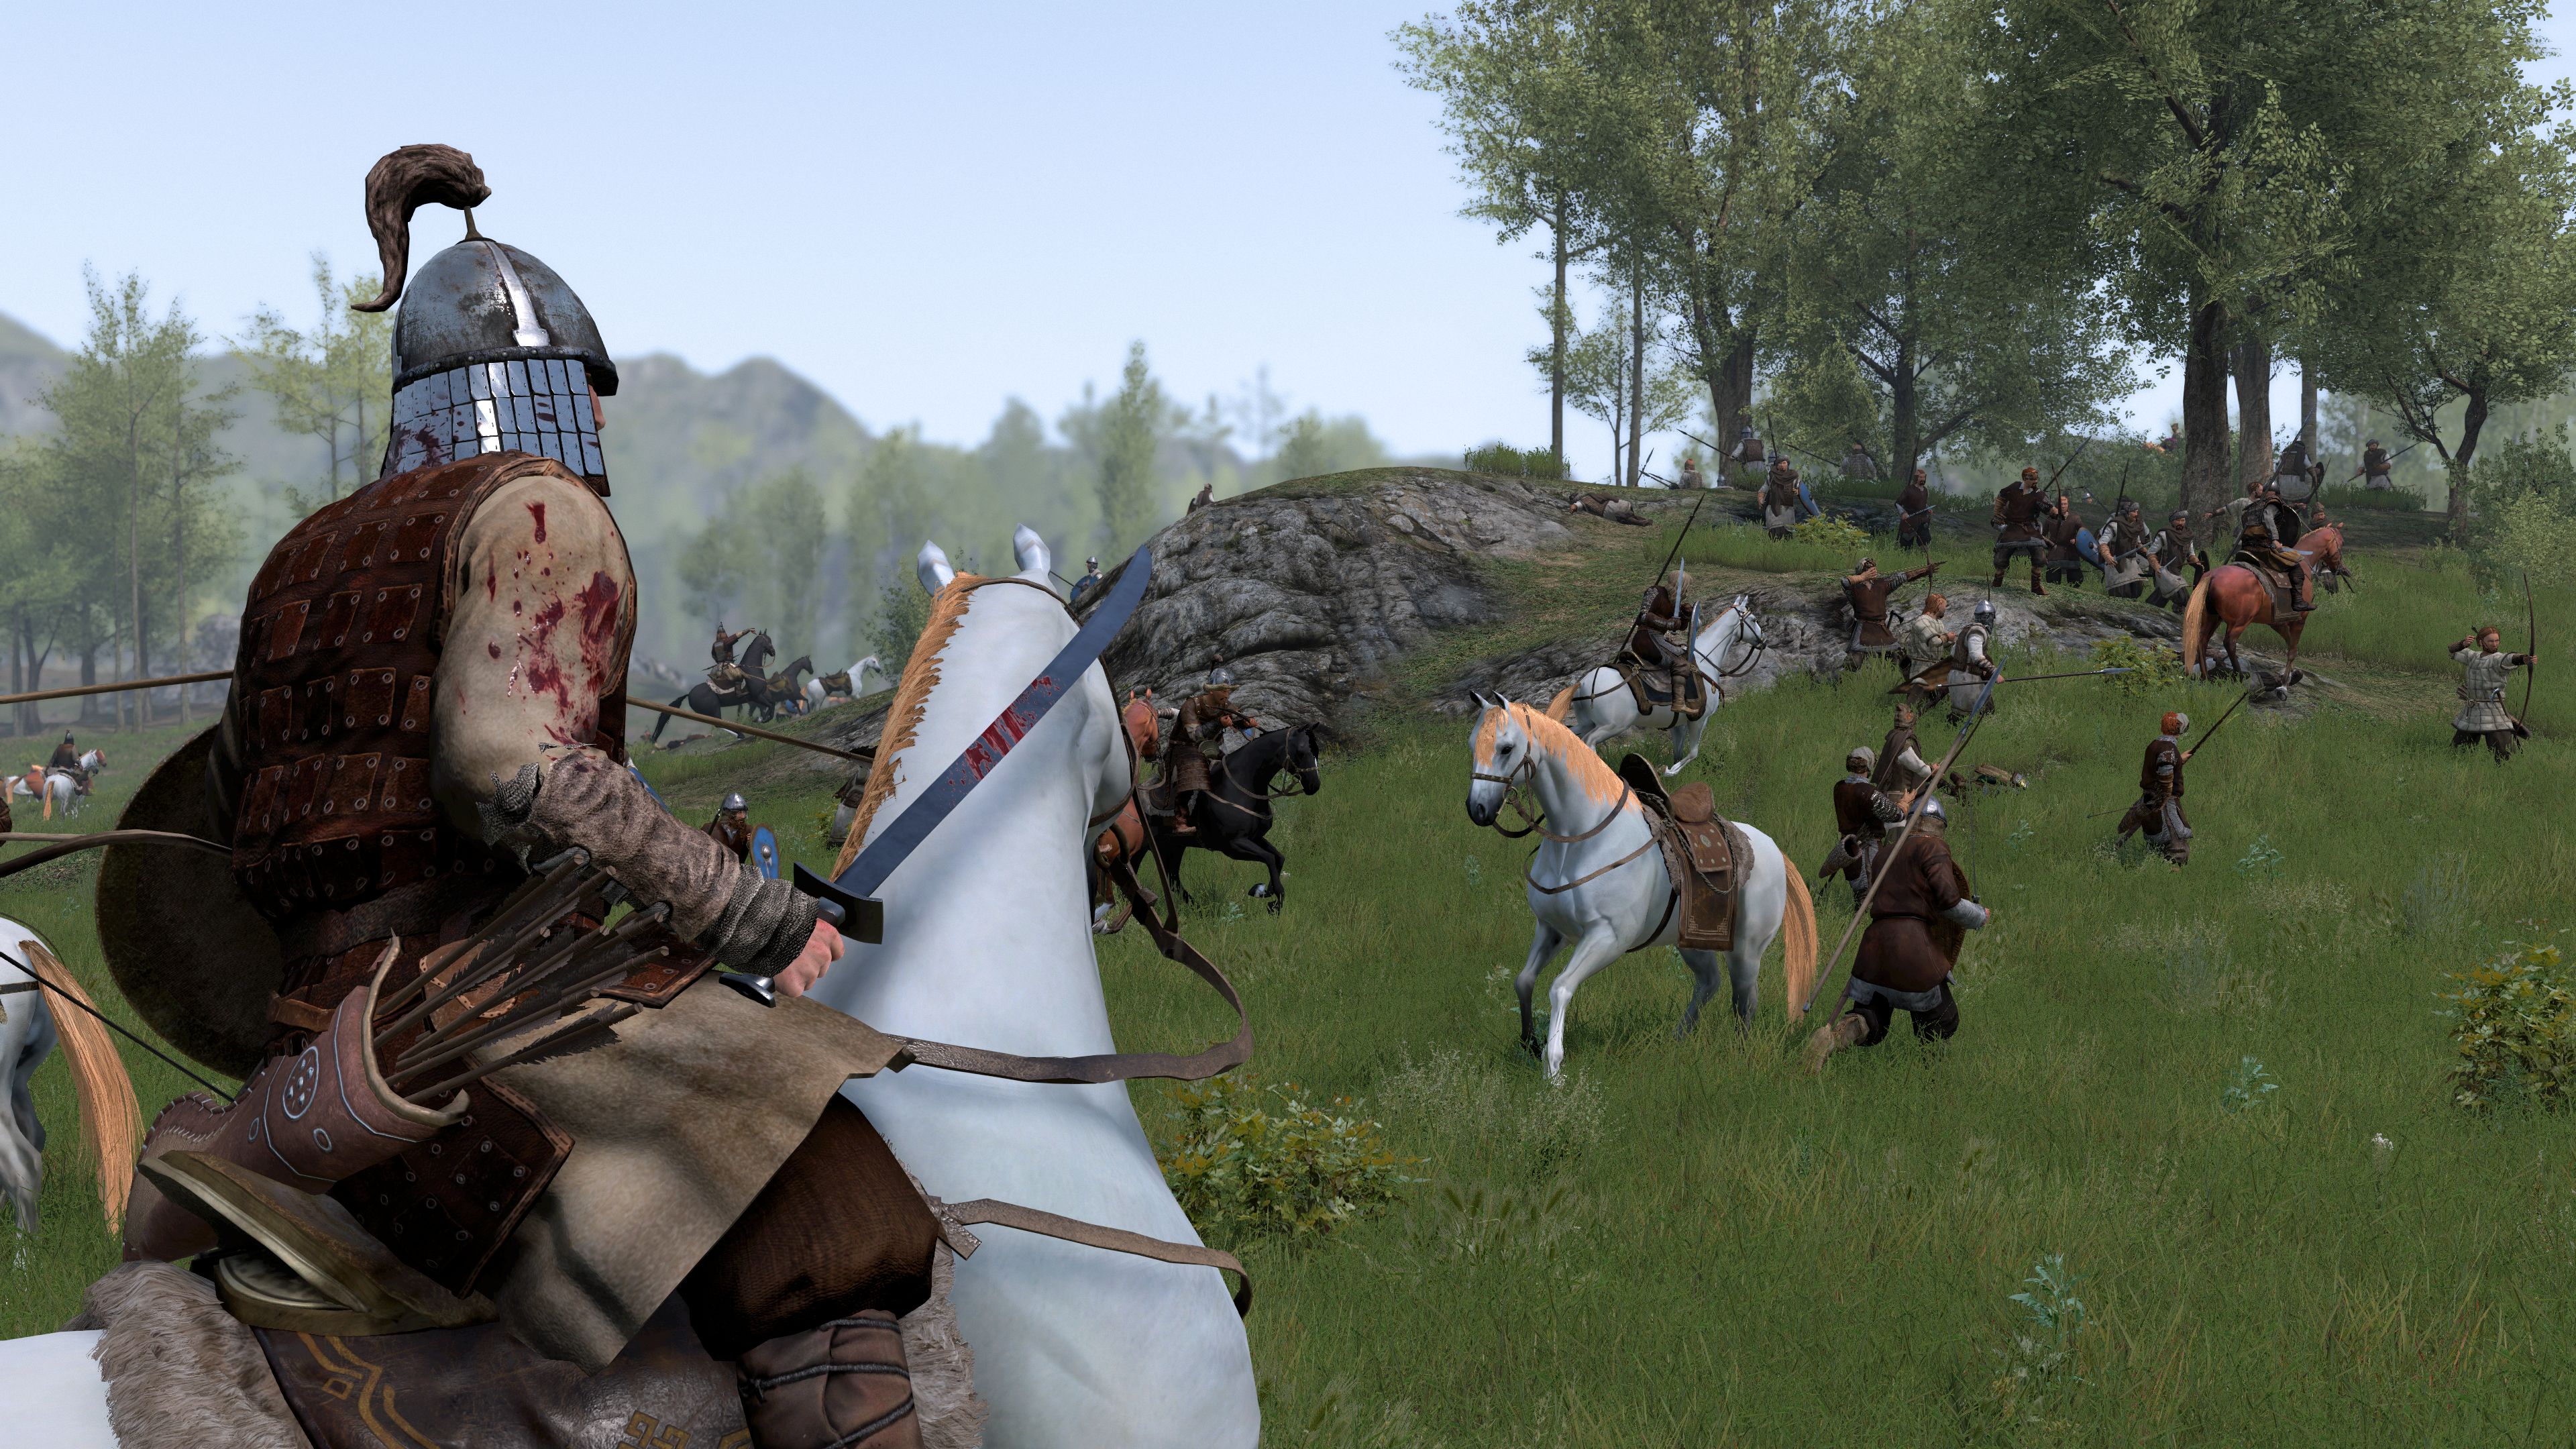 Mount and blade game. Маунт баннерлорд. Игра Mount and Blade 2 Bannerlord. Mount and Blade 2 Warband. Маунтин блейд 2020.